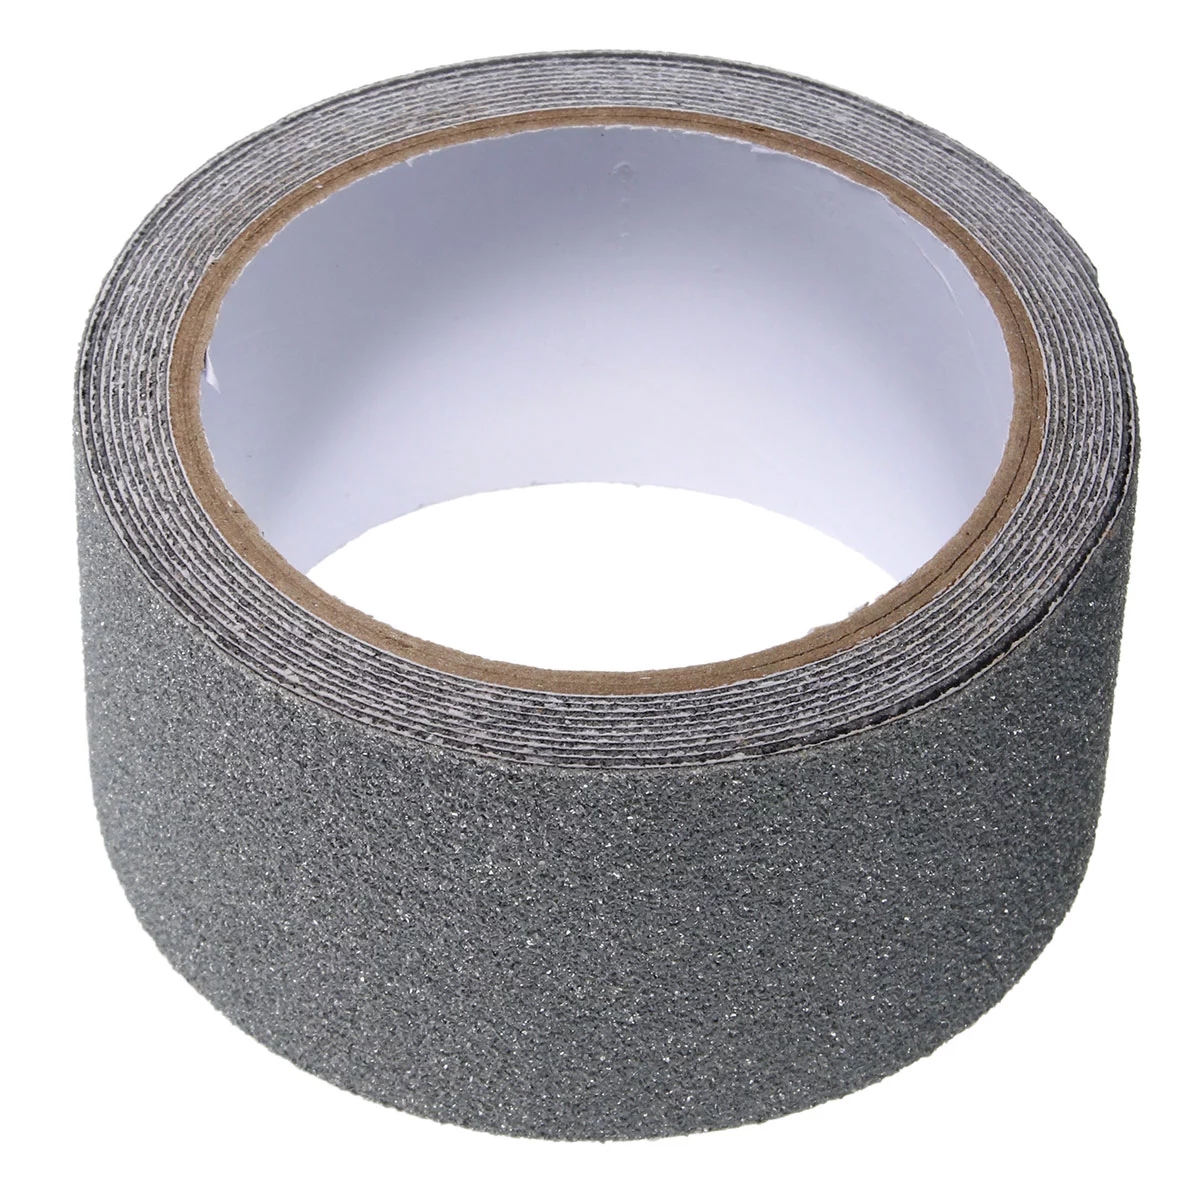 Non-Slip-Safety-Grip-Tape-Anti-Slip-Indoor-Outdoor-Stickers-Strong-Adhesive-Safety-Traction-Tape-Sta-1751585-6